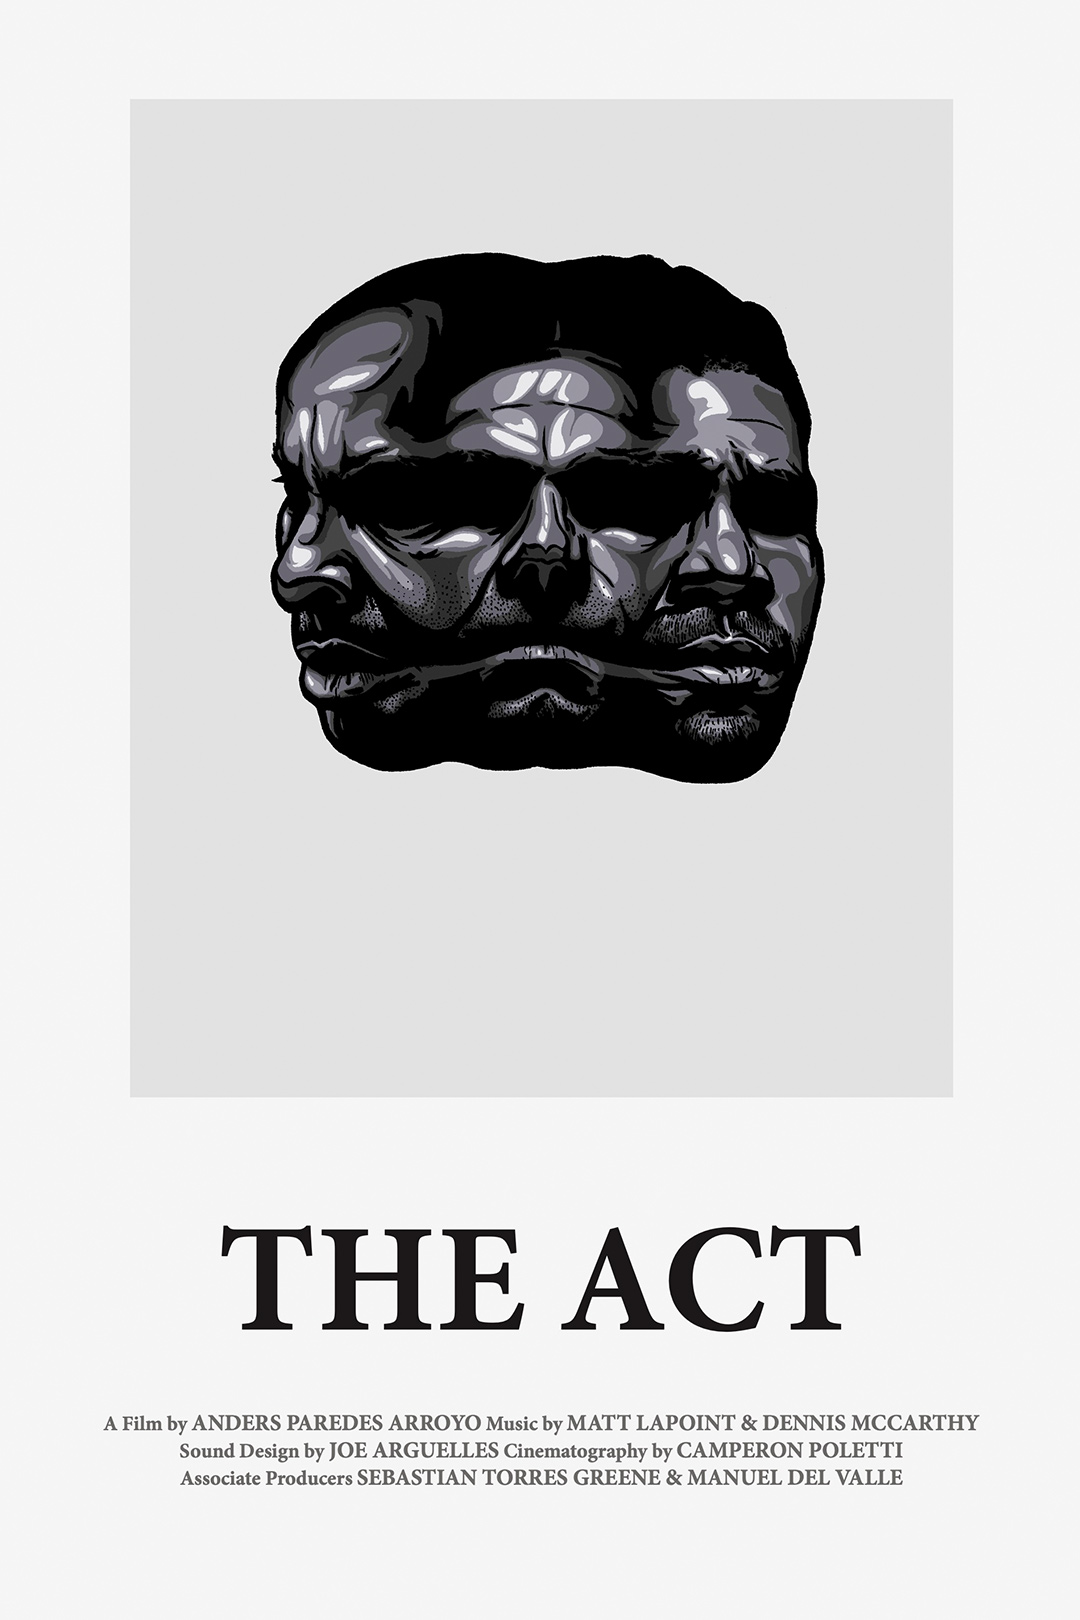 THE ACT - Andrés Paredes